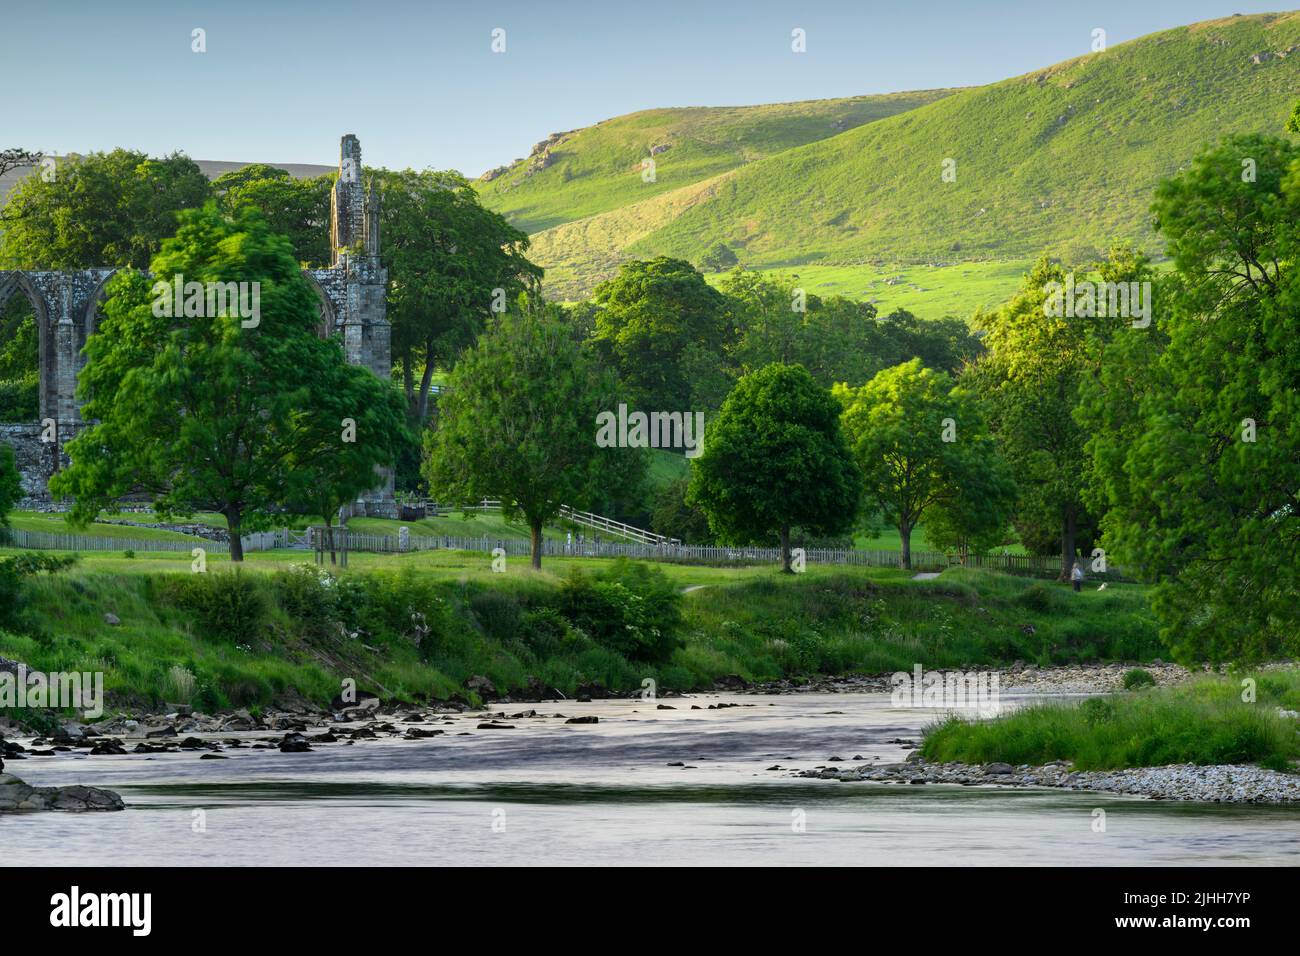 Bolton Abbey (beautiful historic riverside ruin, winding river, sunlit rolling upland hills, summer evening) - Wharfedale Yorkshire Dales, England, UK Stock Photo